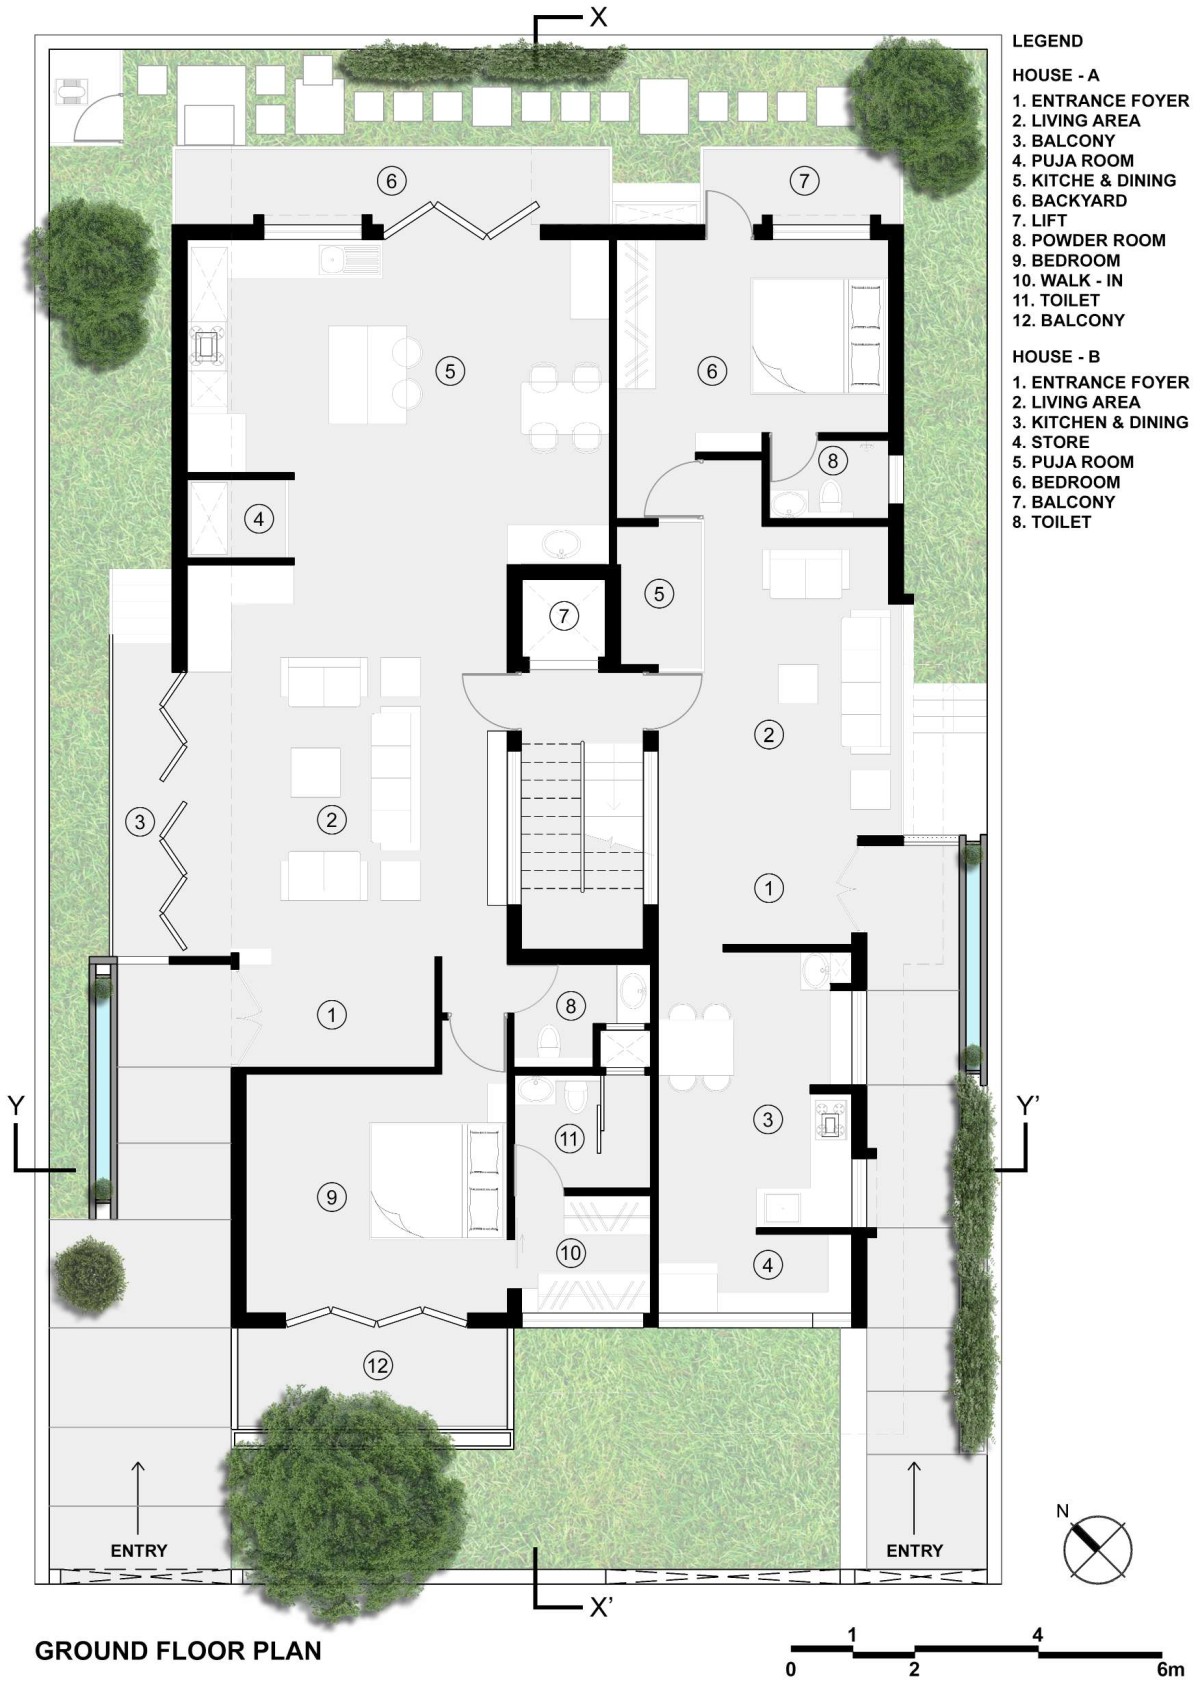 Ground floor plan of Linear House by Int-Hab Architecture + Design Studio